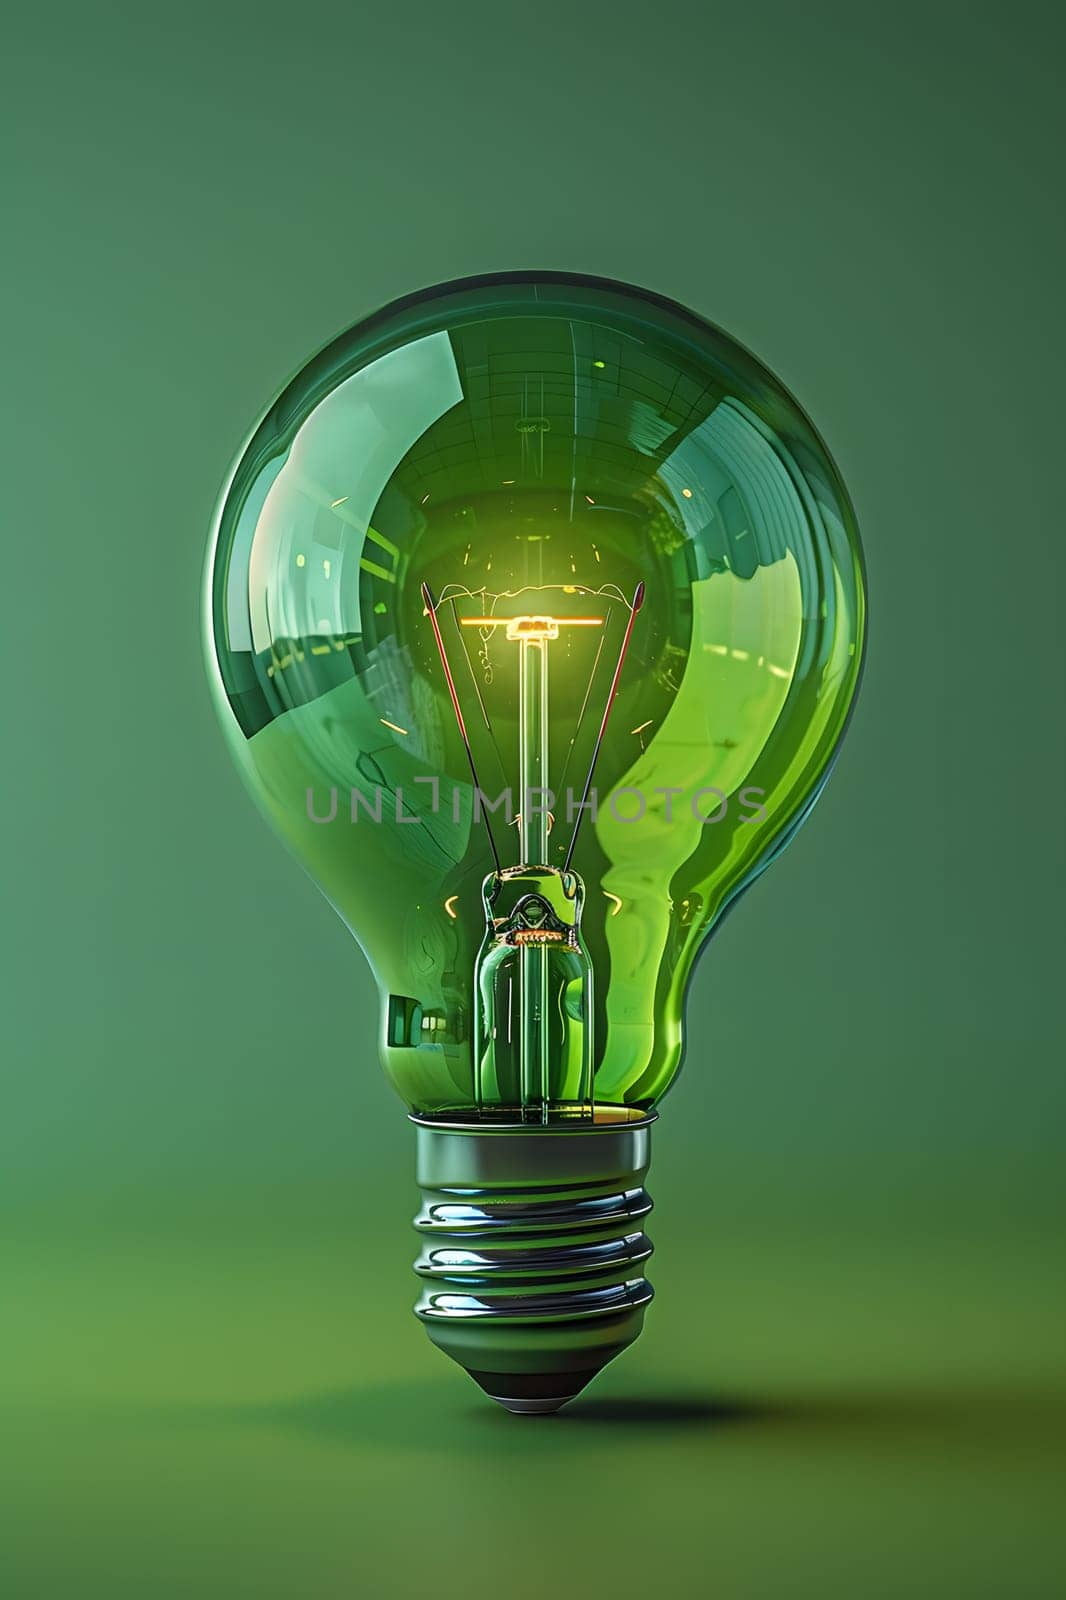 A green fluorescent lamp is placed on a green surface, emitting light powered by gas and electricity. The circleshaped light bulb illuminates the area